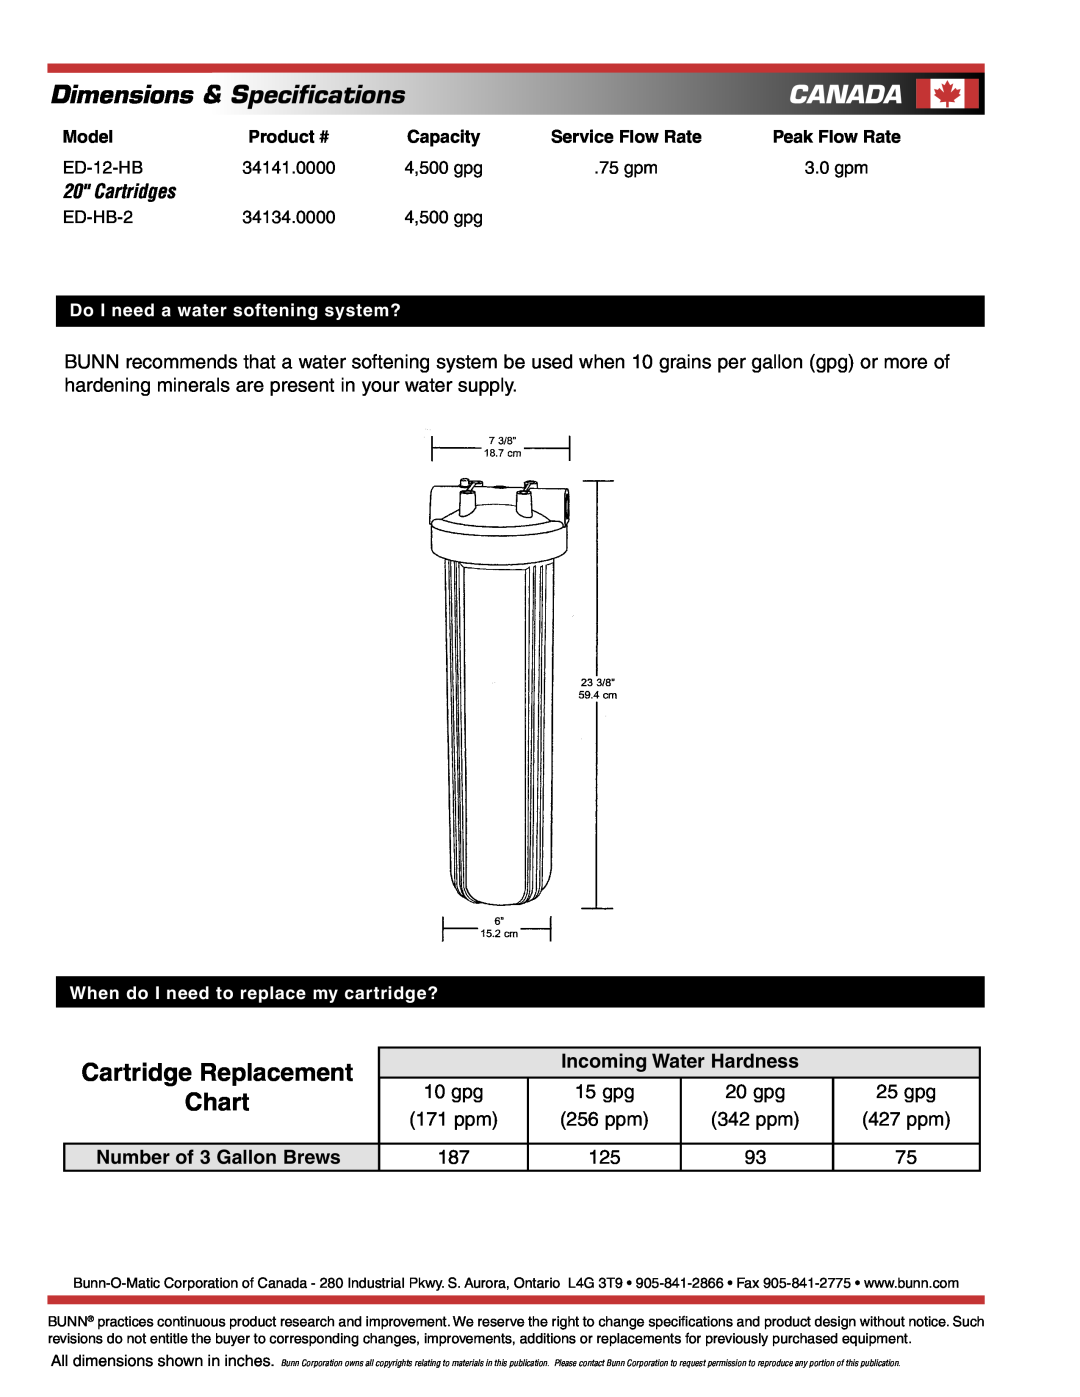 Bunn ED-12-HB Canada, Cartridge Replacement, Dimensions & Speciﬁcations, Chart, Cartridges, Incoming Water Hardness 